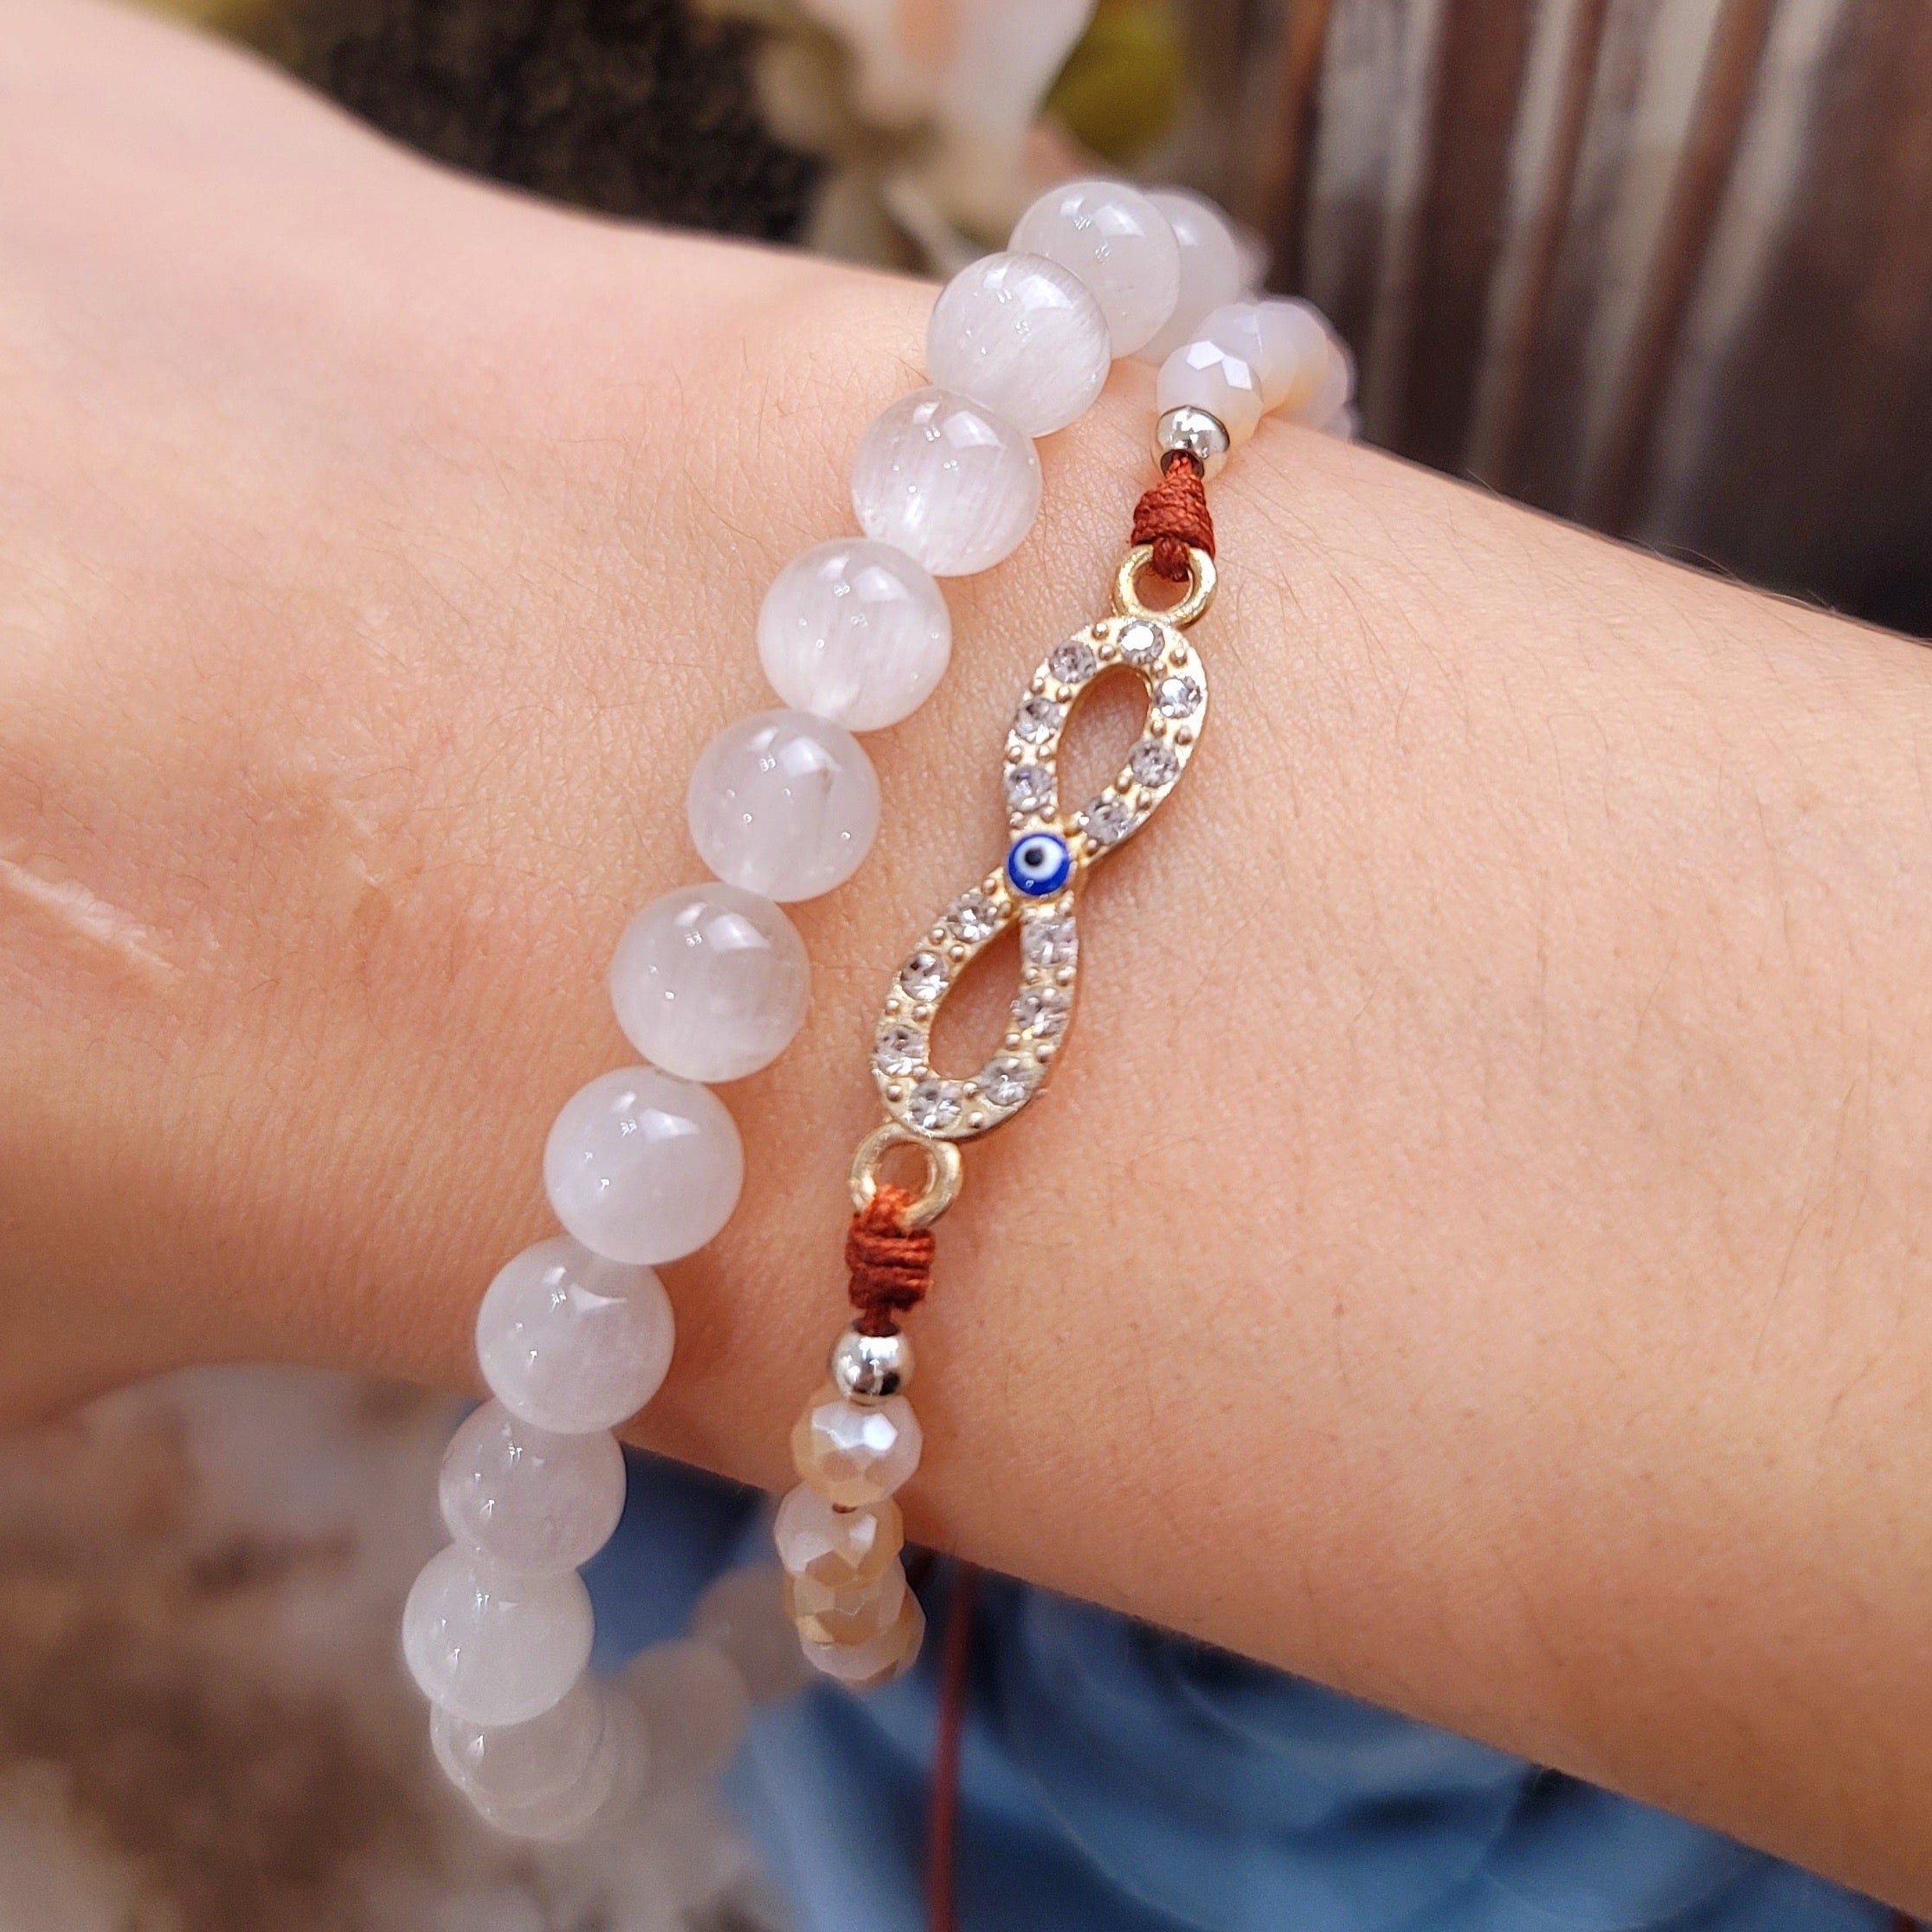 Icey White Rutile in Quartz Bracelet (AAA Grade) for Awakening your Spiritual Gifts, Connection with Angels and Ancestors